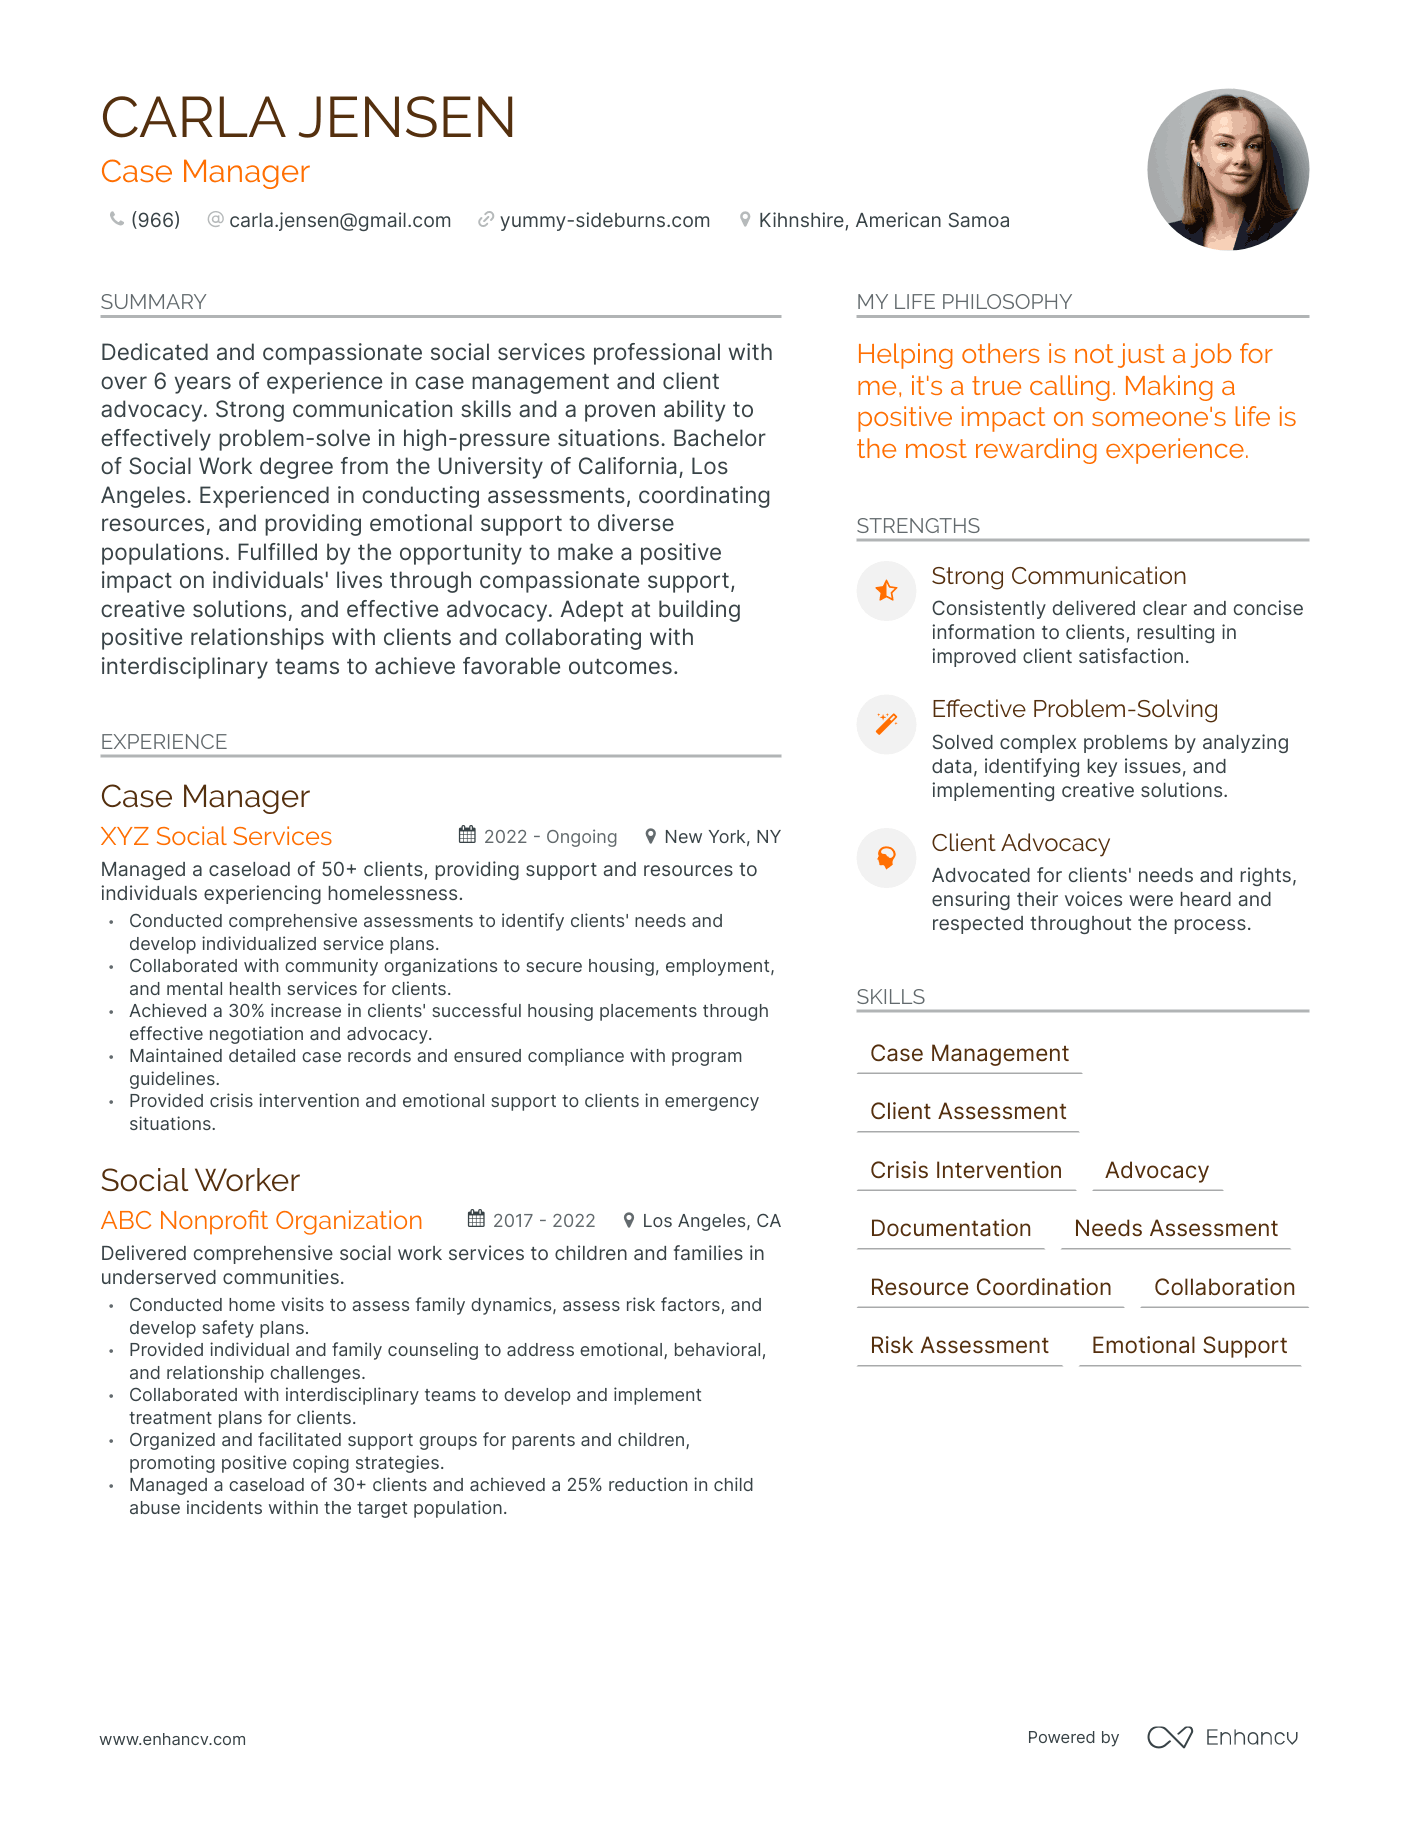 Case Manager resume example